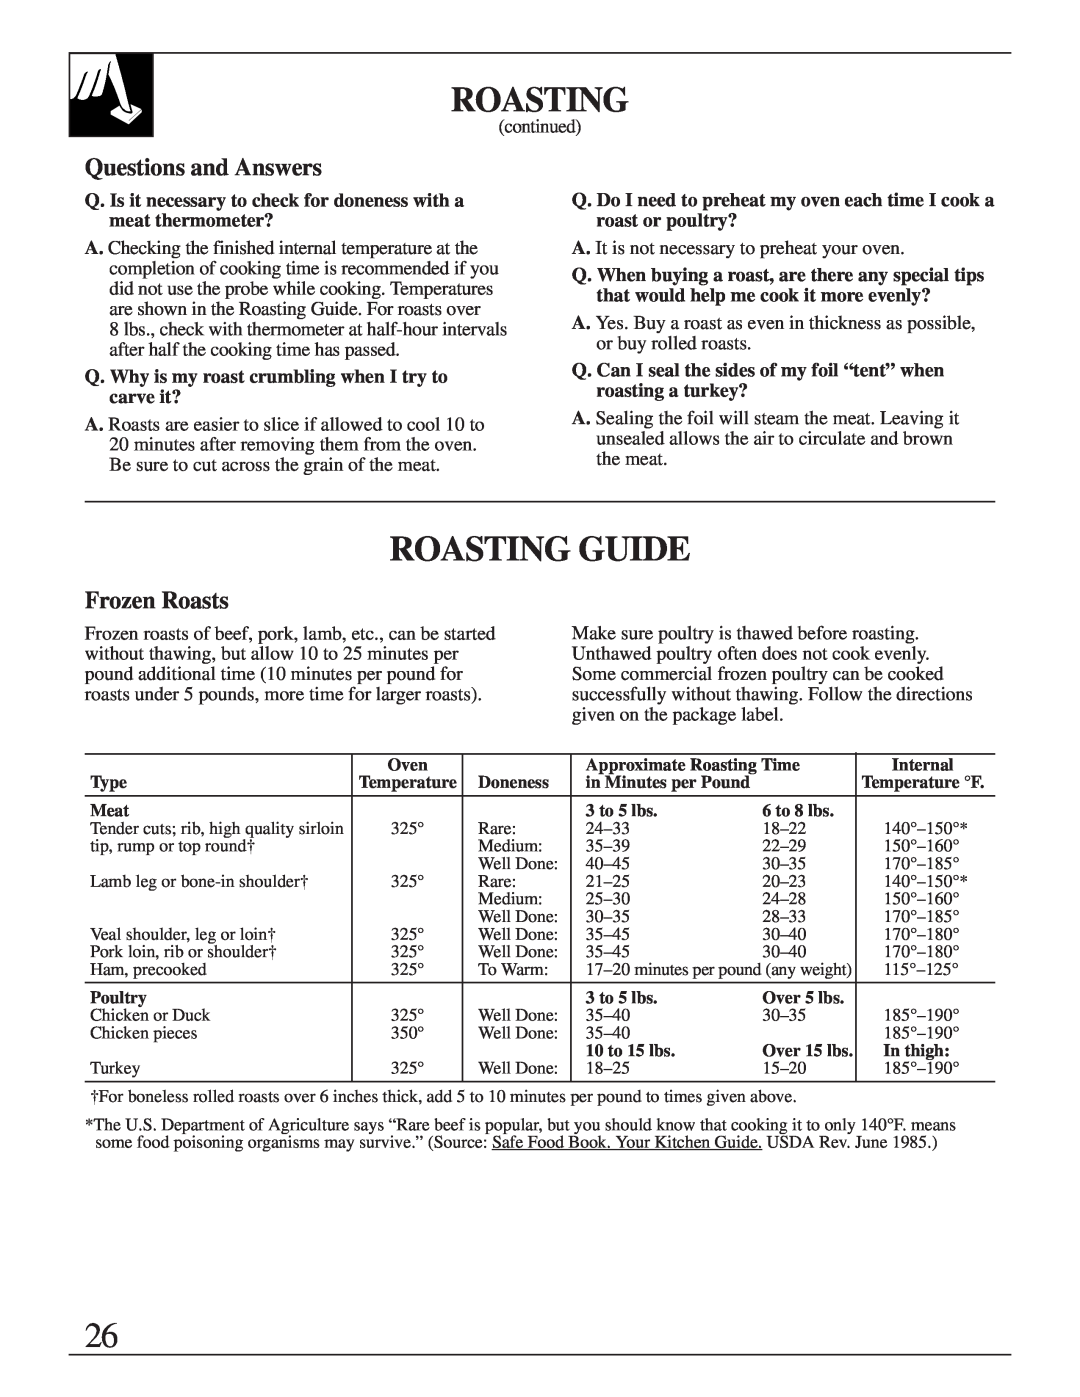 GE 164D2966P205-1 manual Roasting Guide, Questions and Answers, Frozen Roasts 